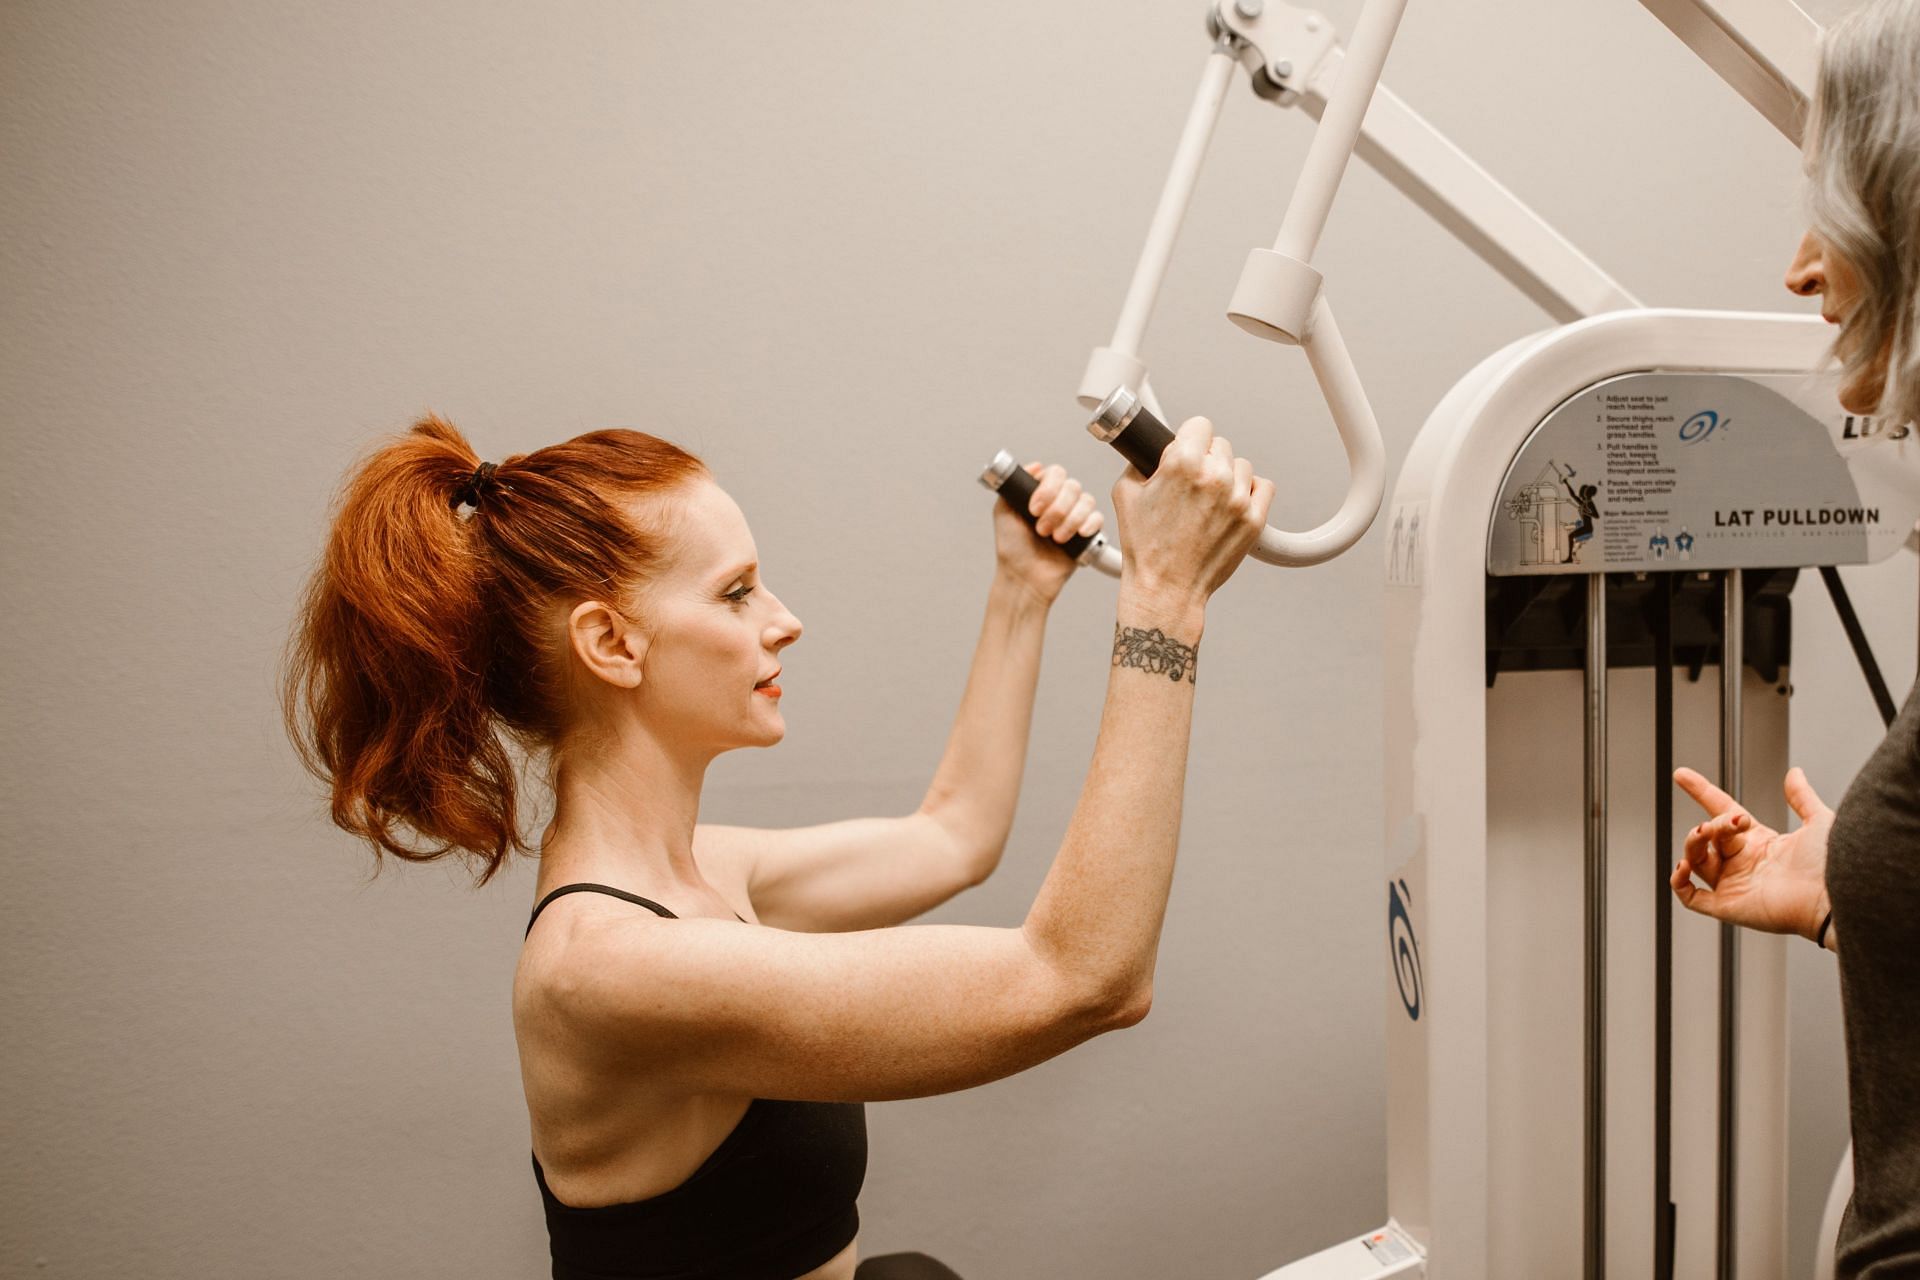 Lat pulldown cable workout. (Image credits: Pexels/ Rdne stock project)